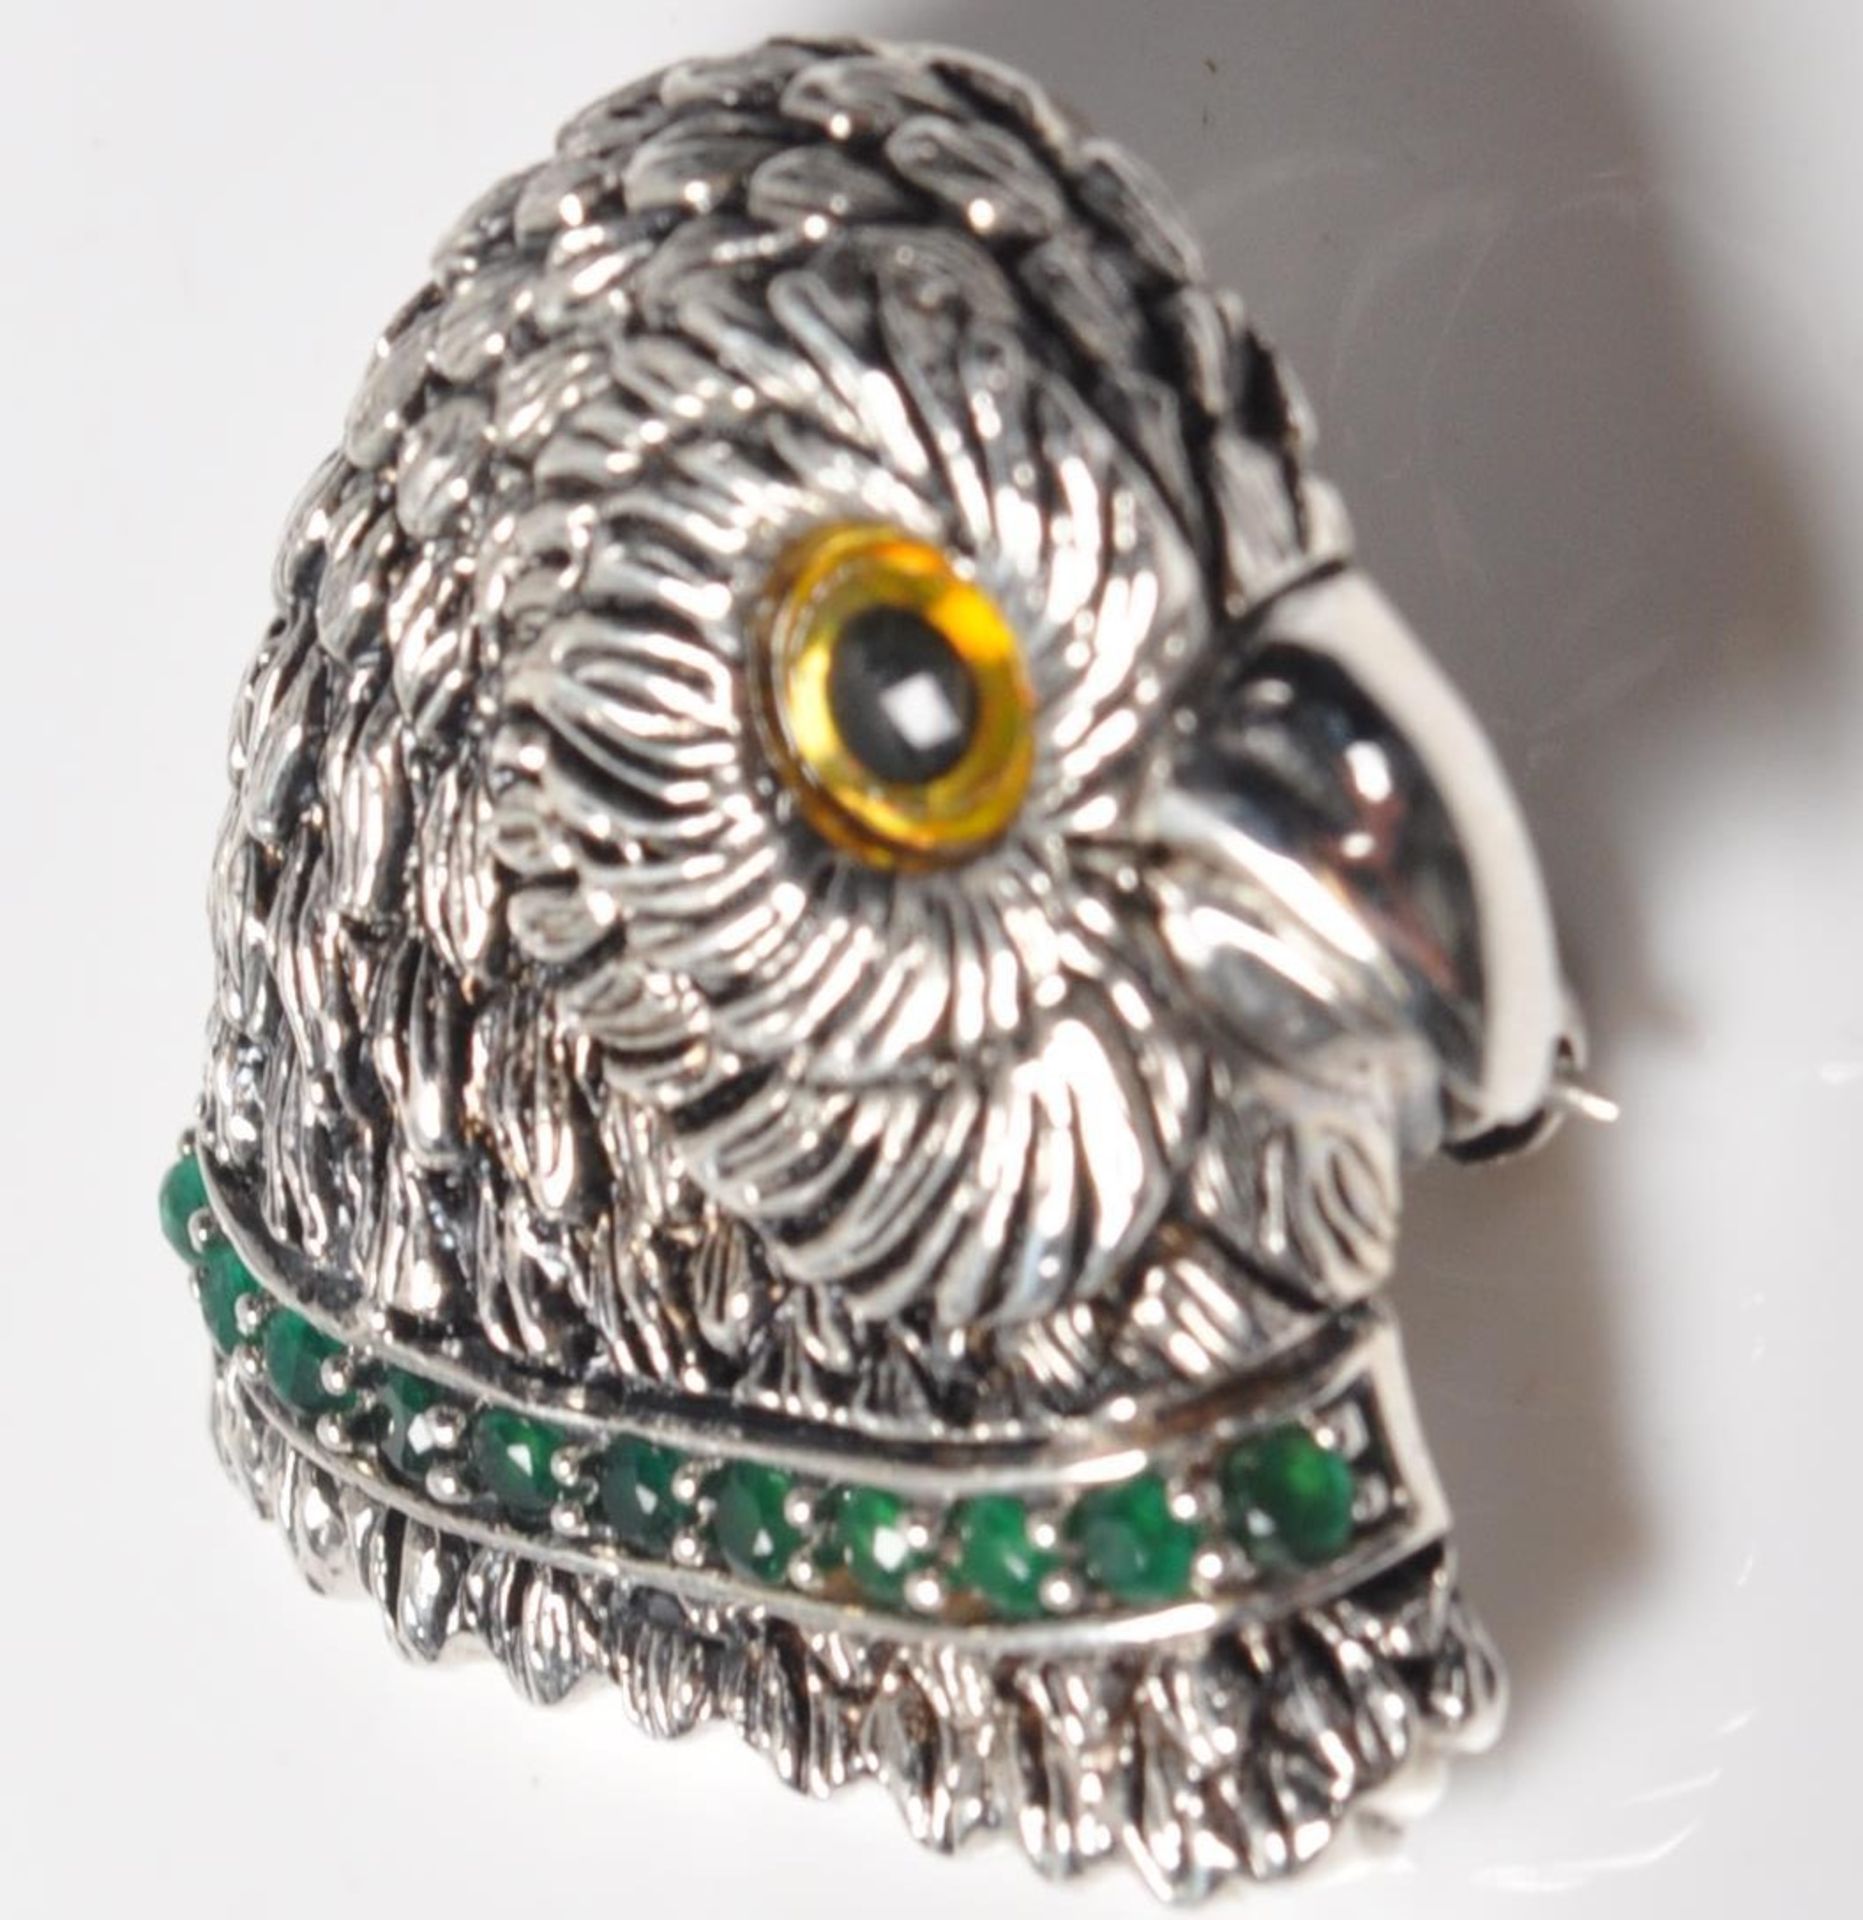 STAMPED STERLING SILVER OWL SHAPED BROOCH - Image 4 of 4